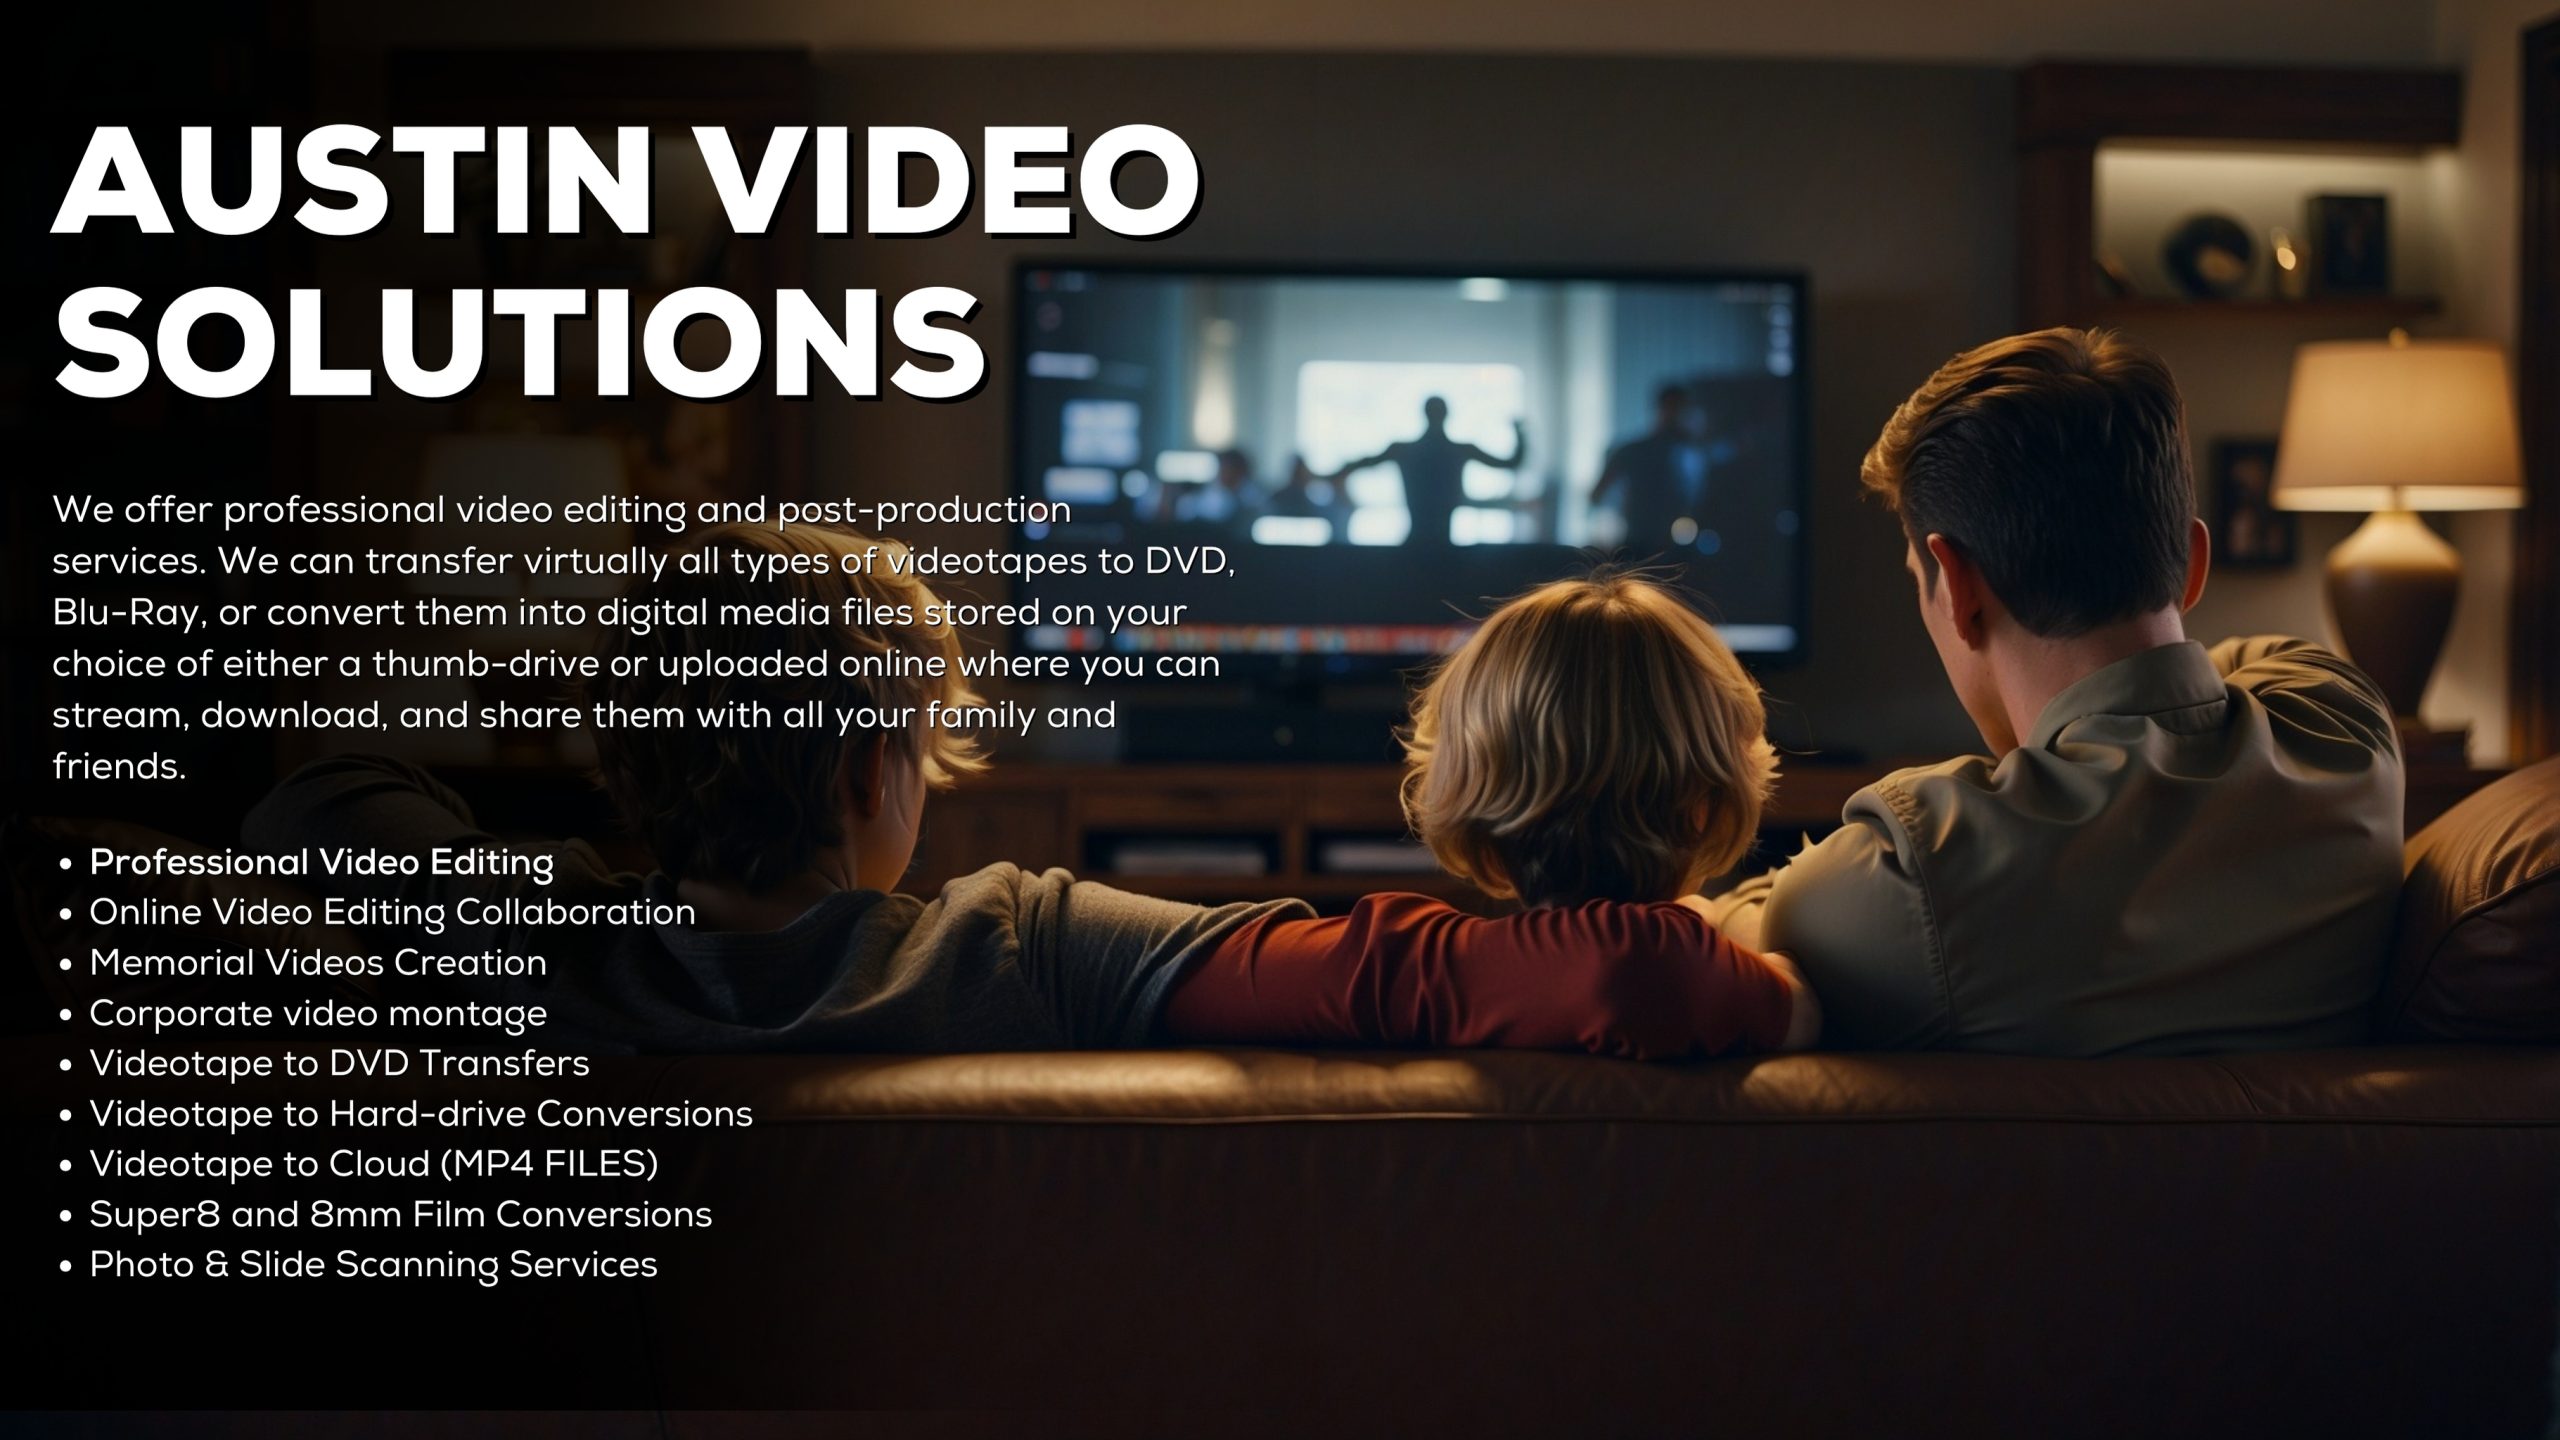 Austin Video Solutions Professional Video Editing Services Videotape to DVD Transfers and video tape digitization